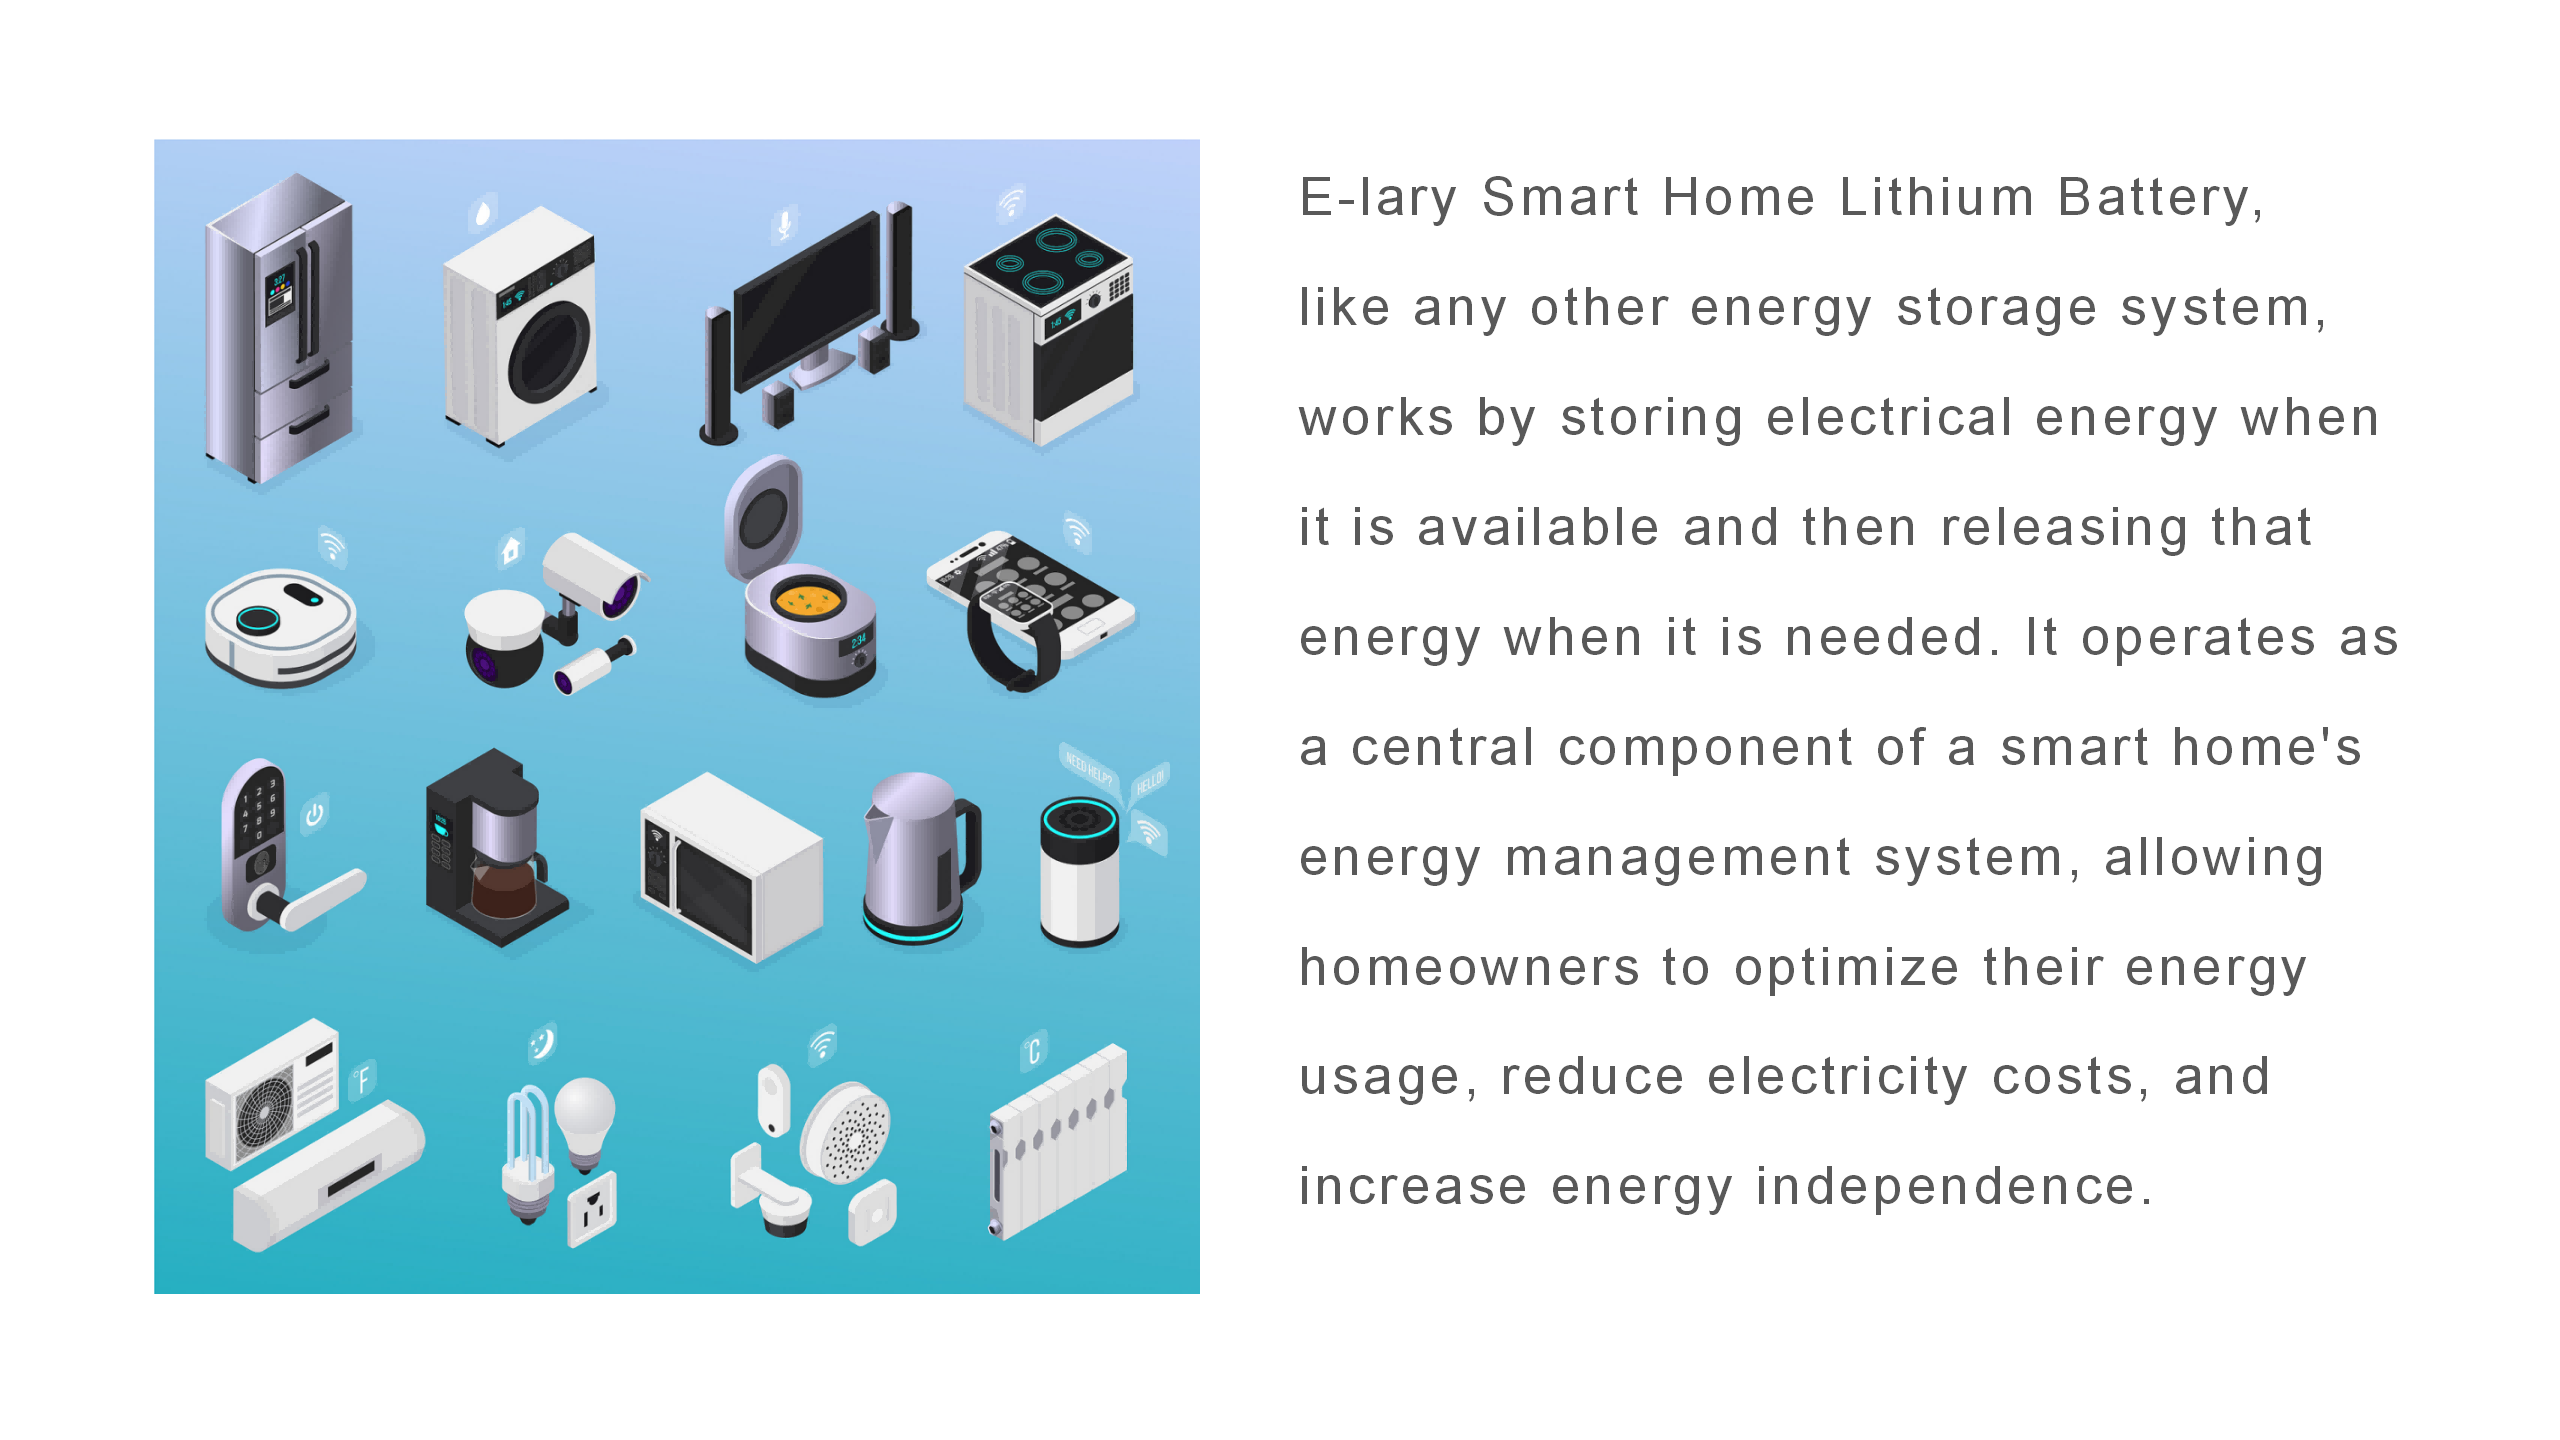 How Does E-lary Smart Home Lithium Battery work？